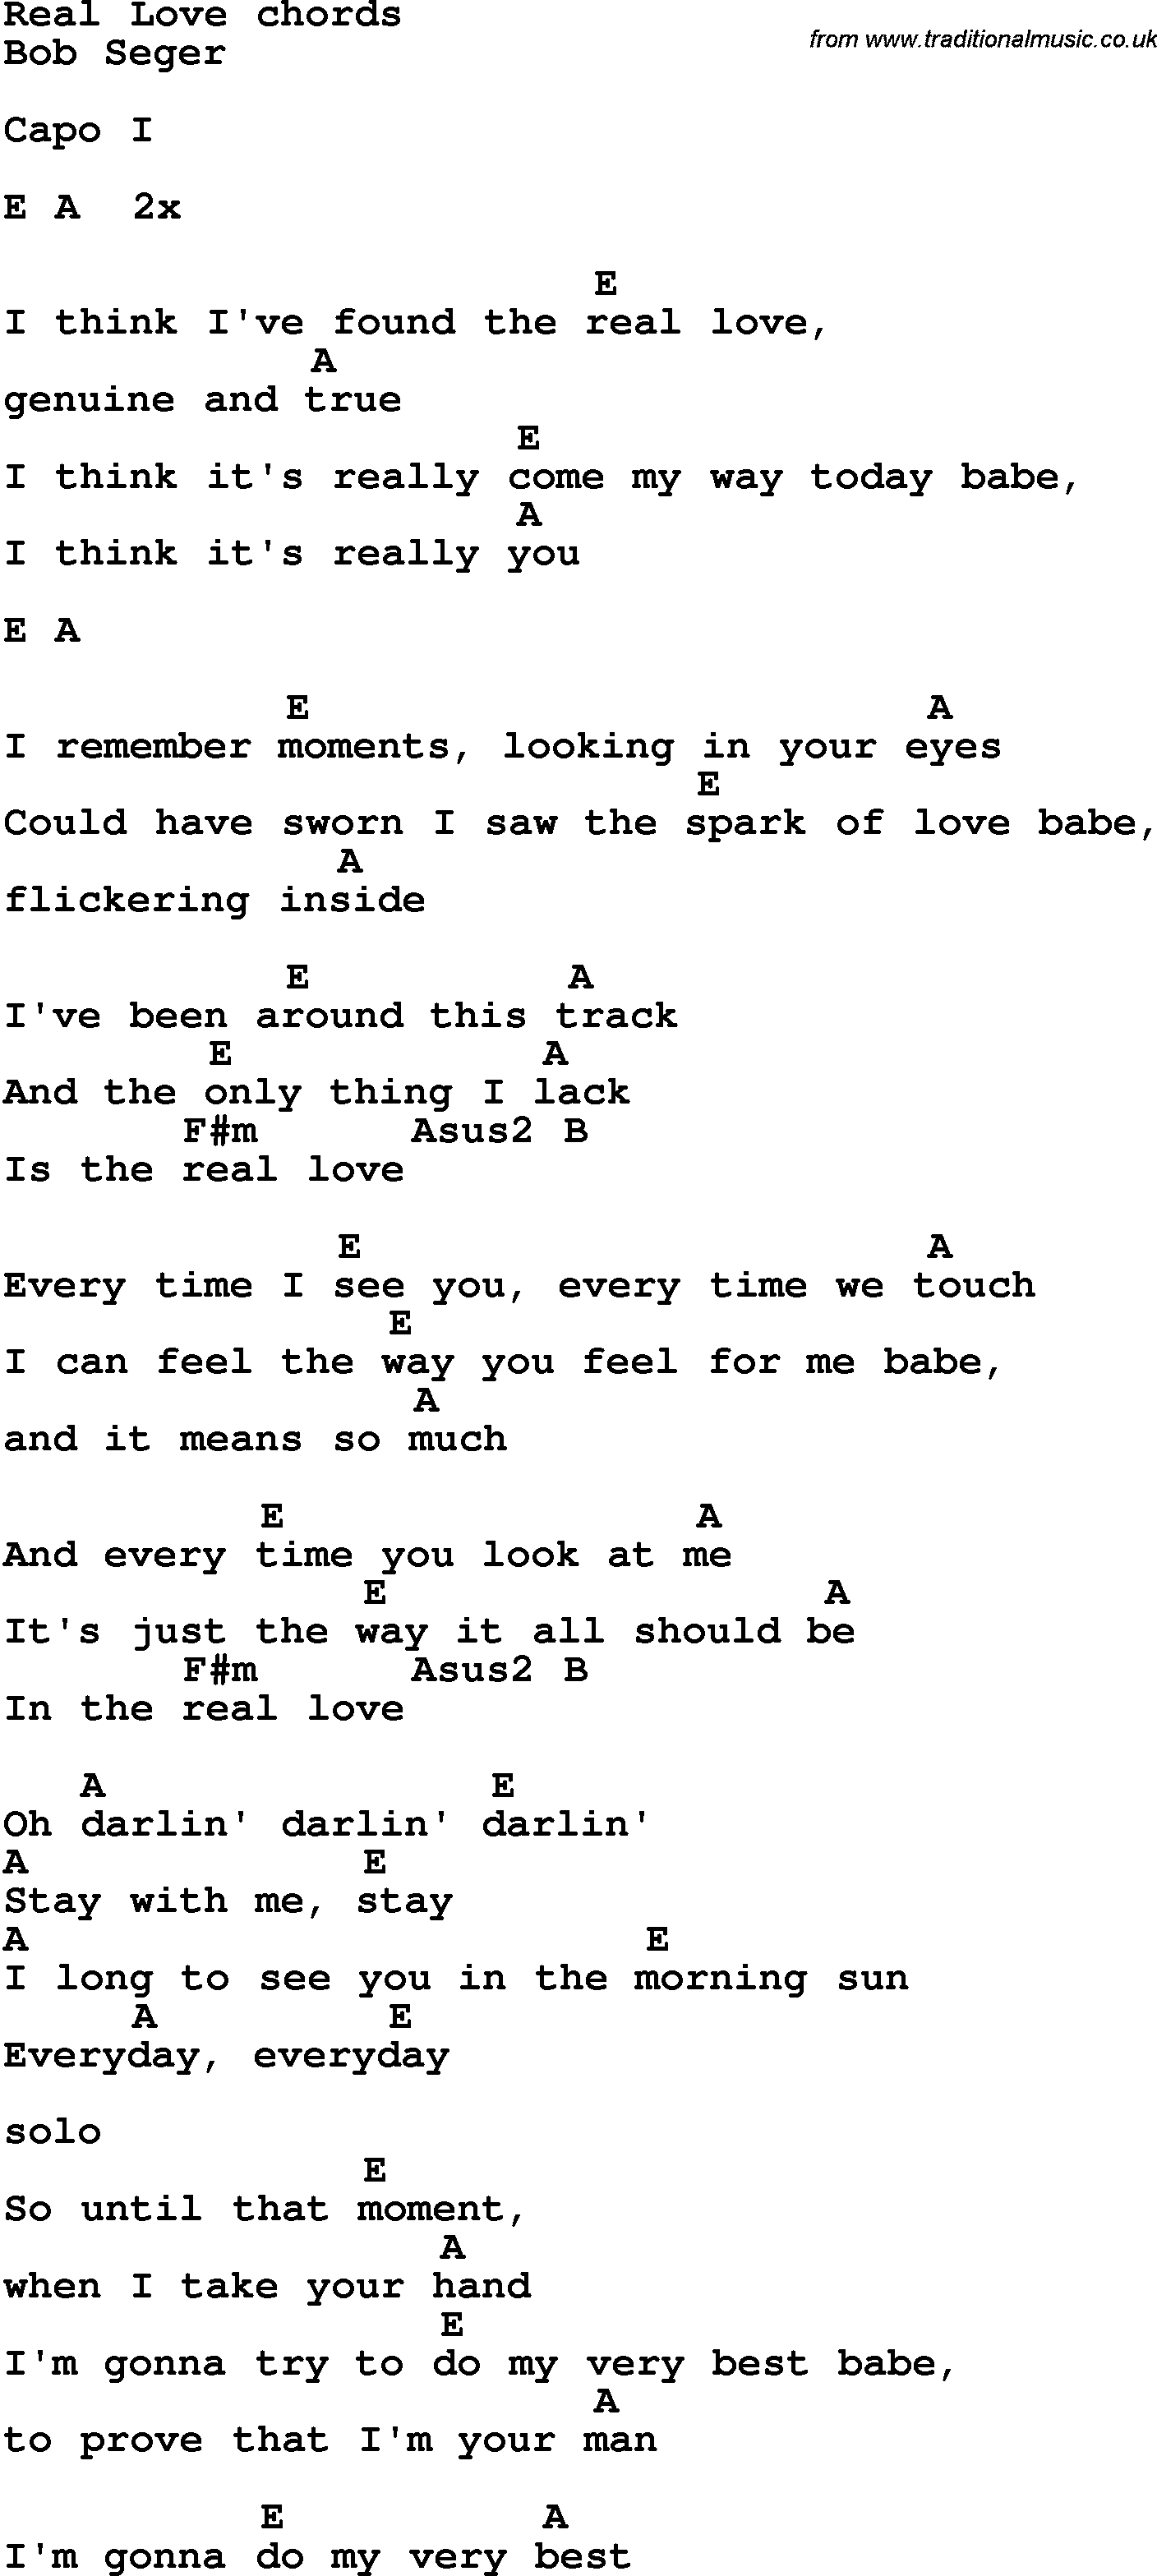 Song Lyrics with guitar chords for Real Love